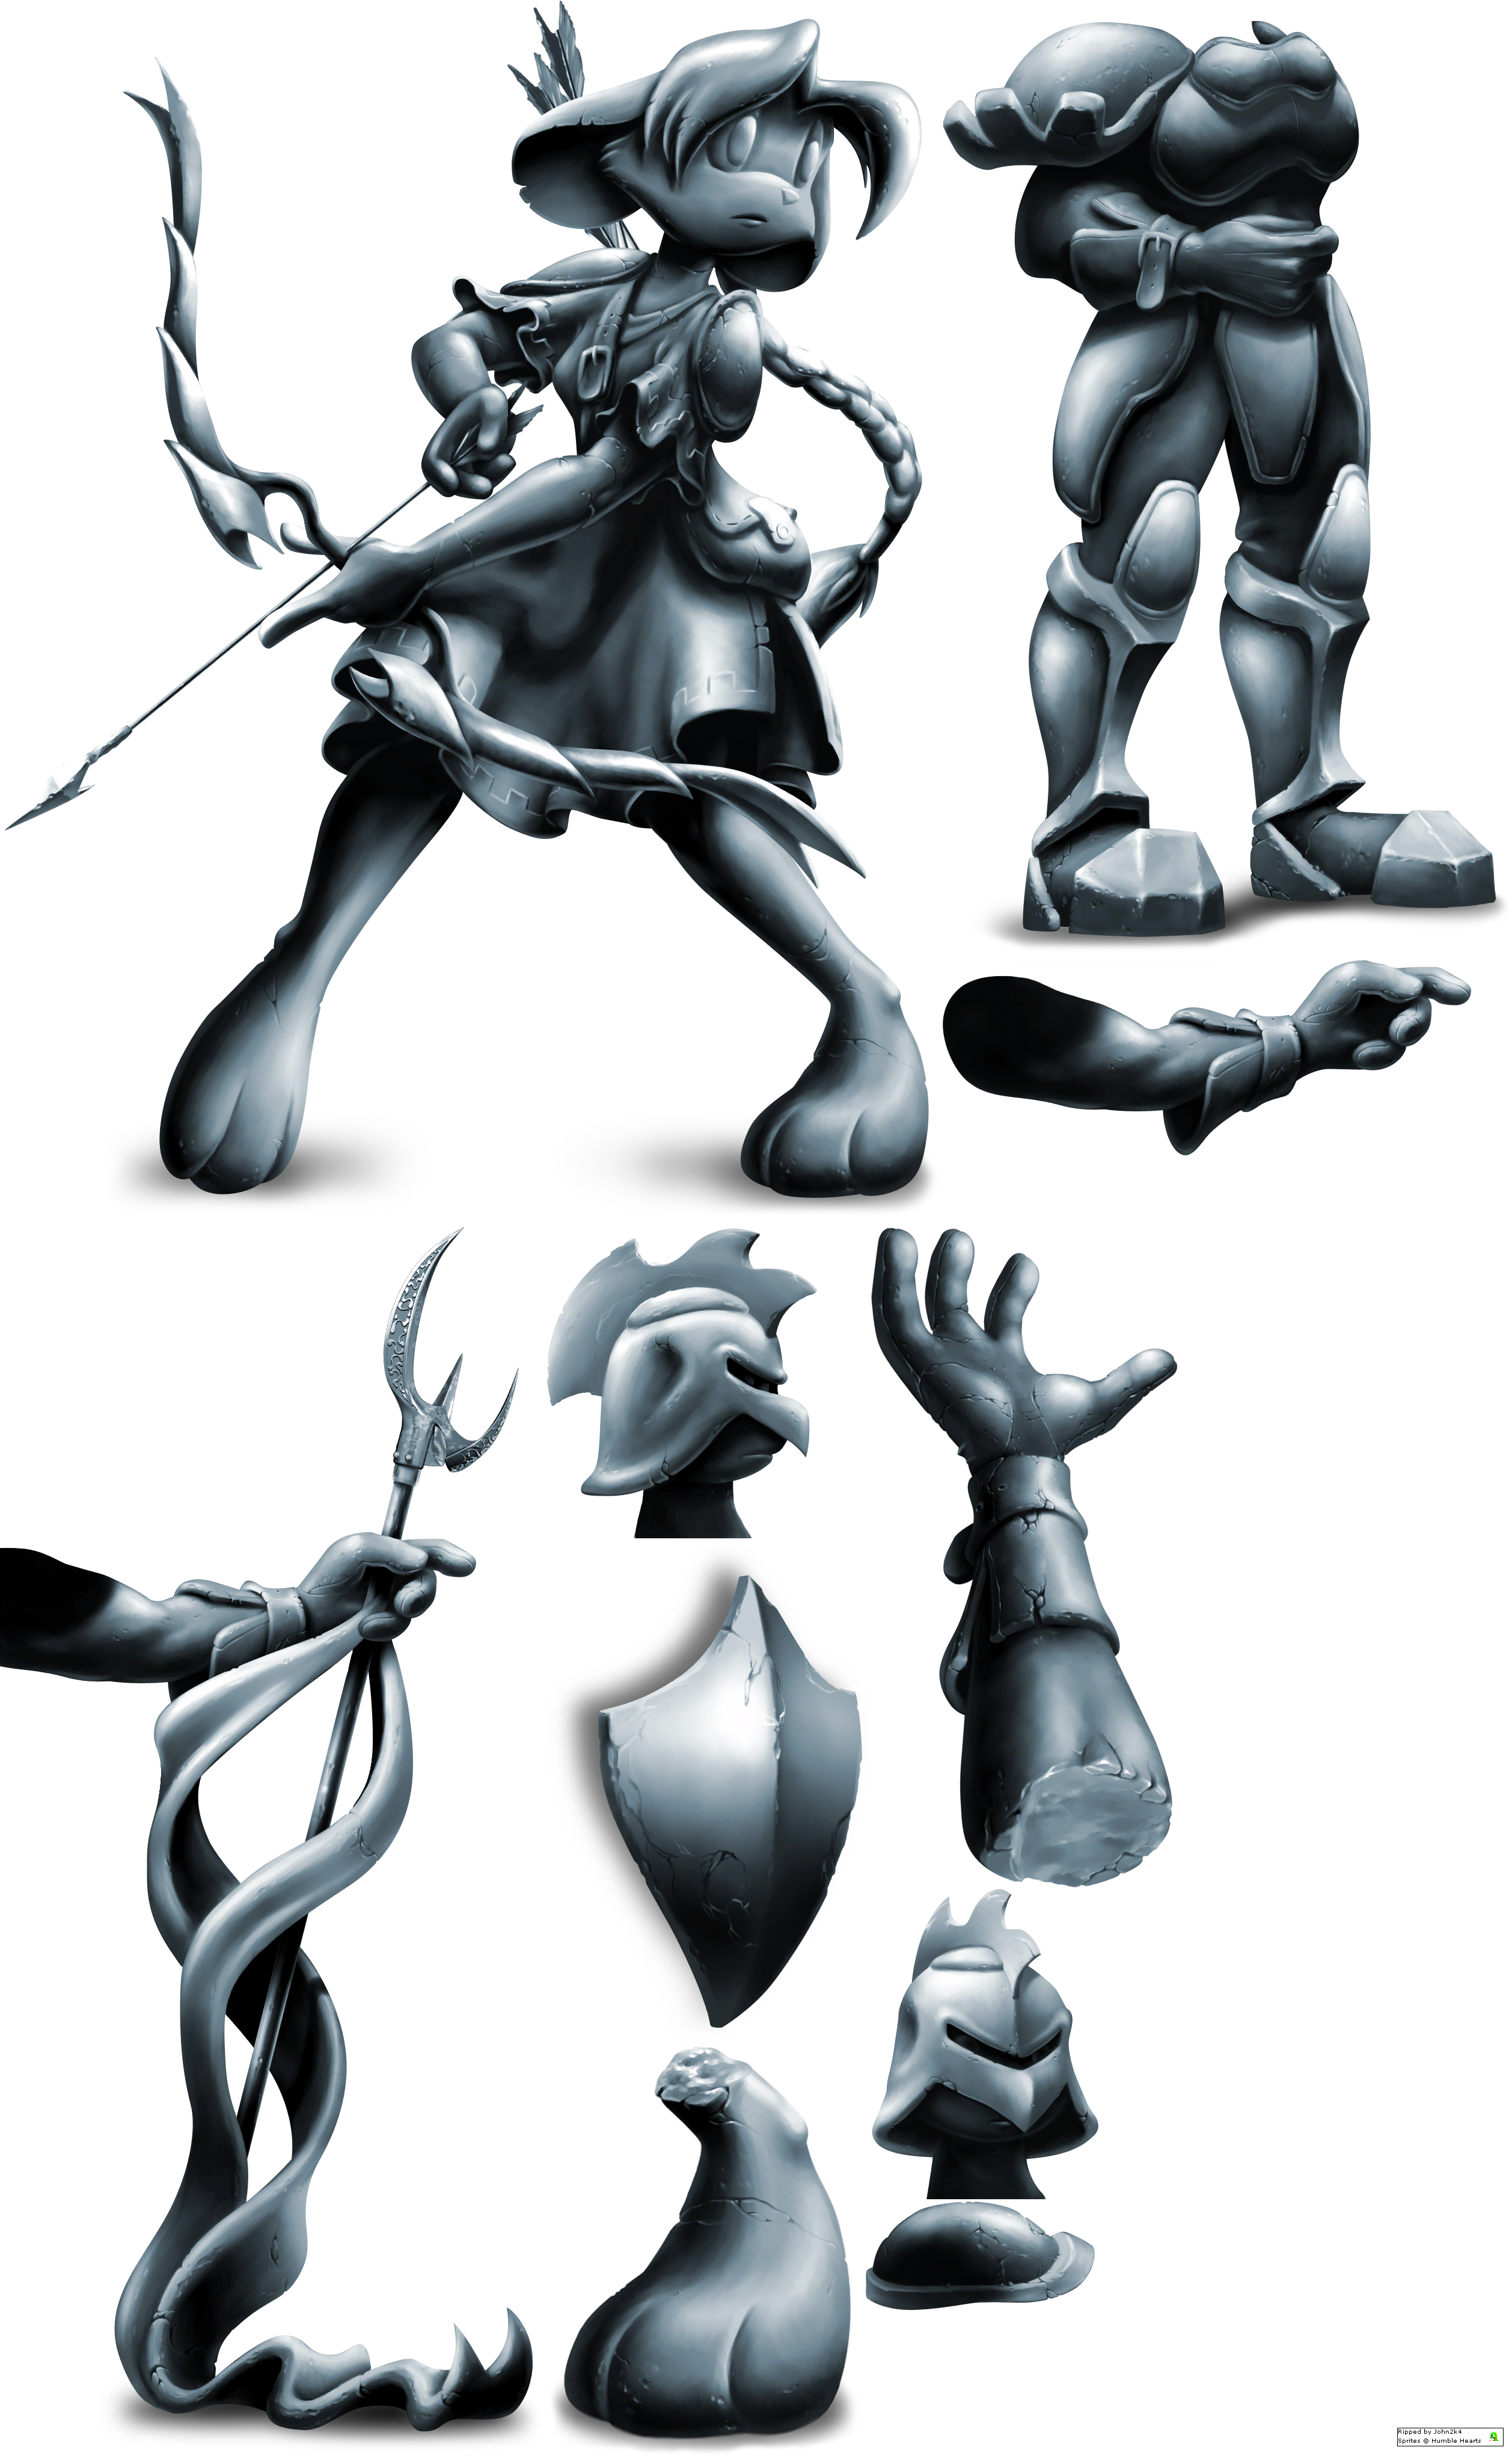 Dust: An Elysian Tail - Statue Objects